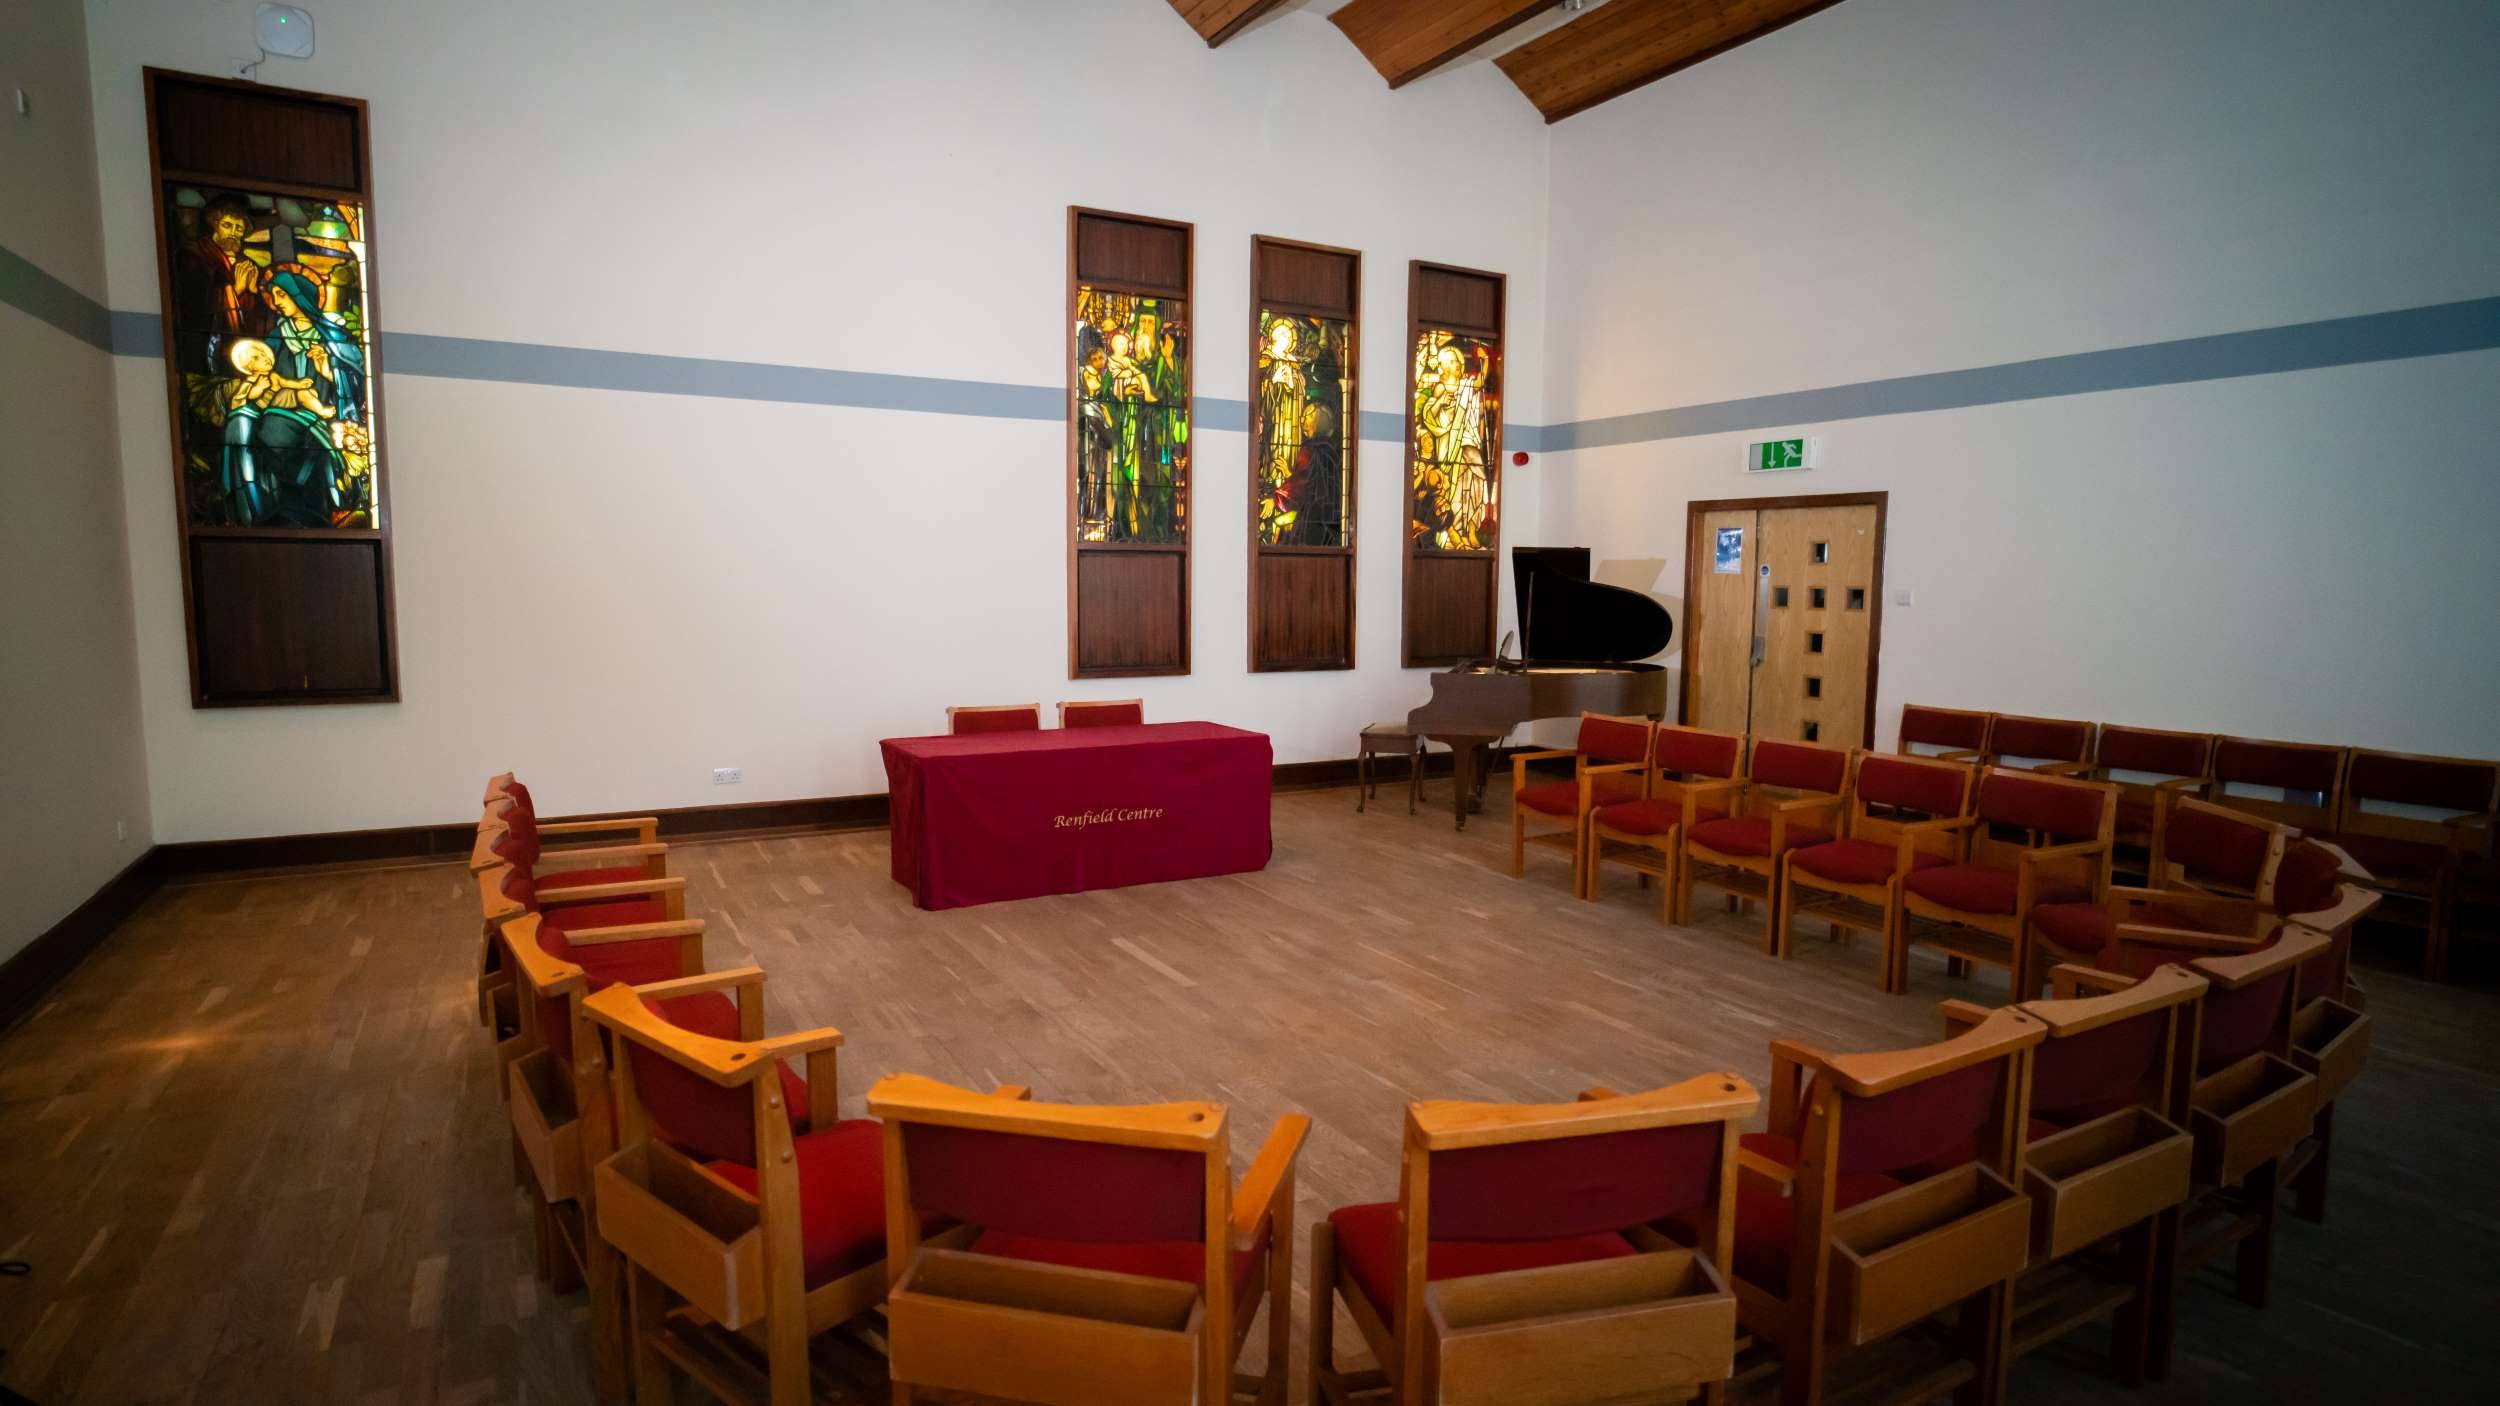 Seating horseshoe style in the Chapel at Renfield Centre